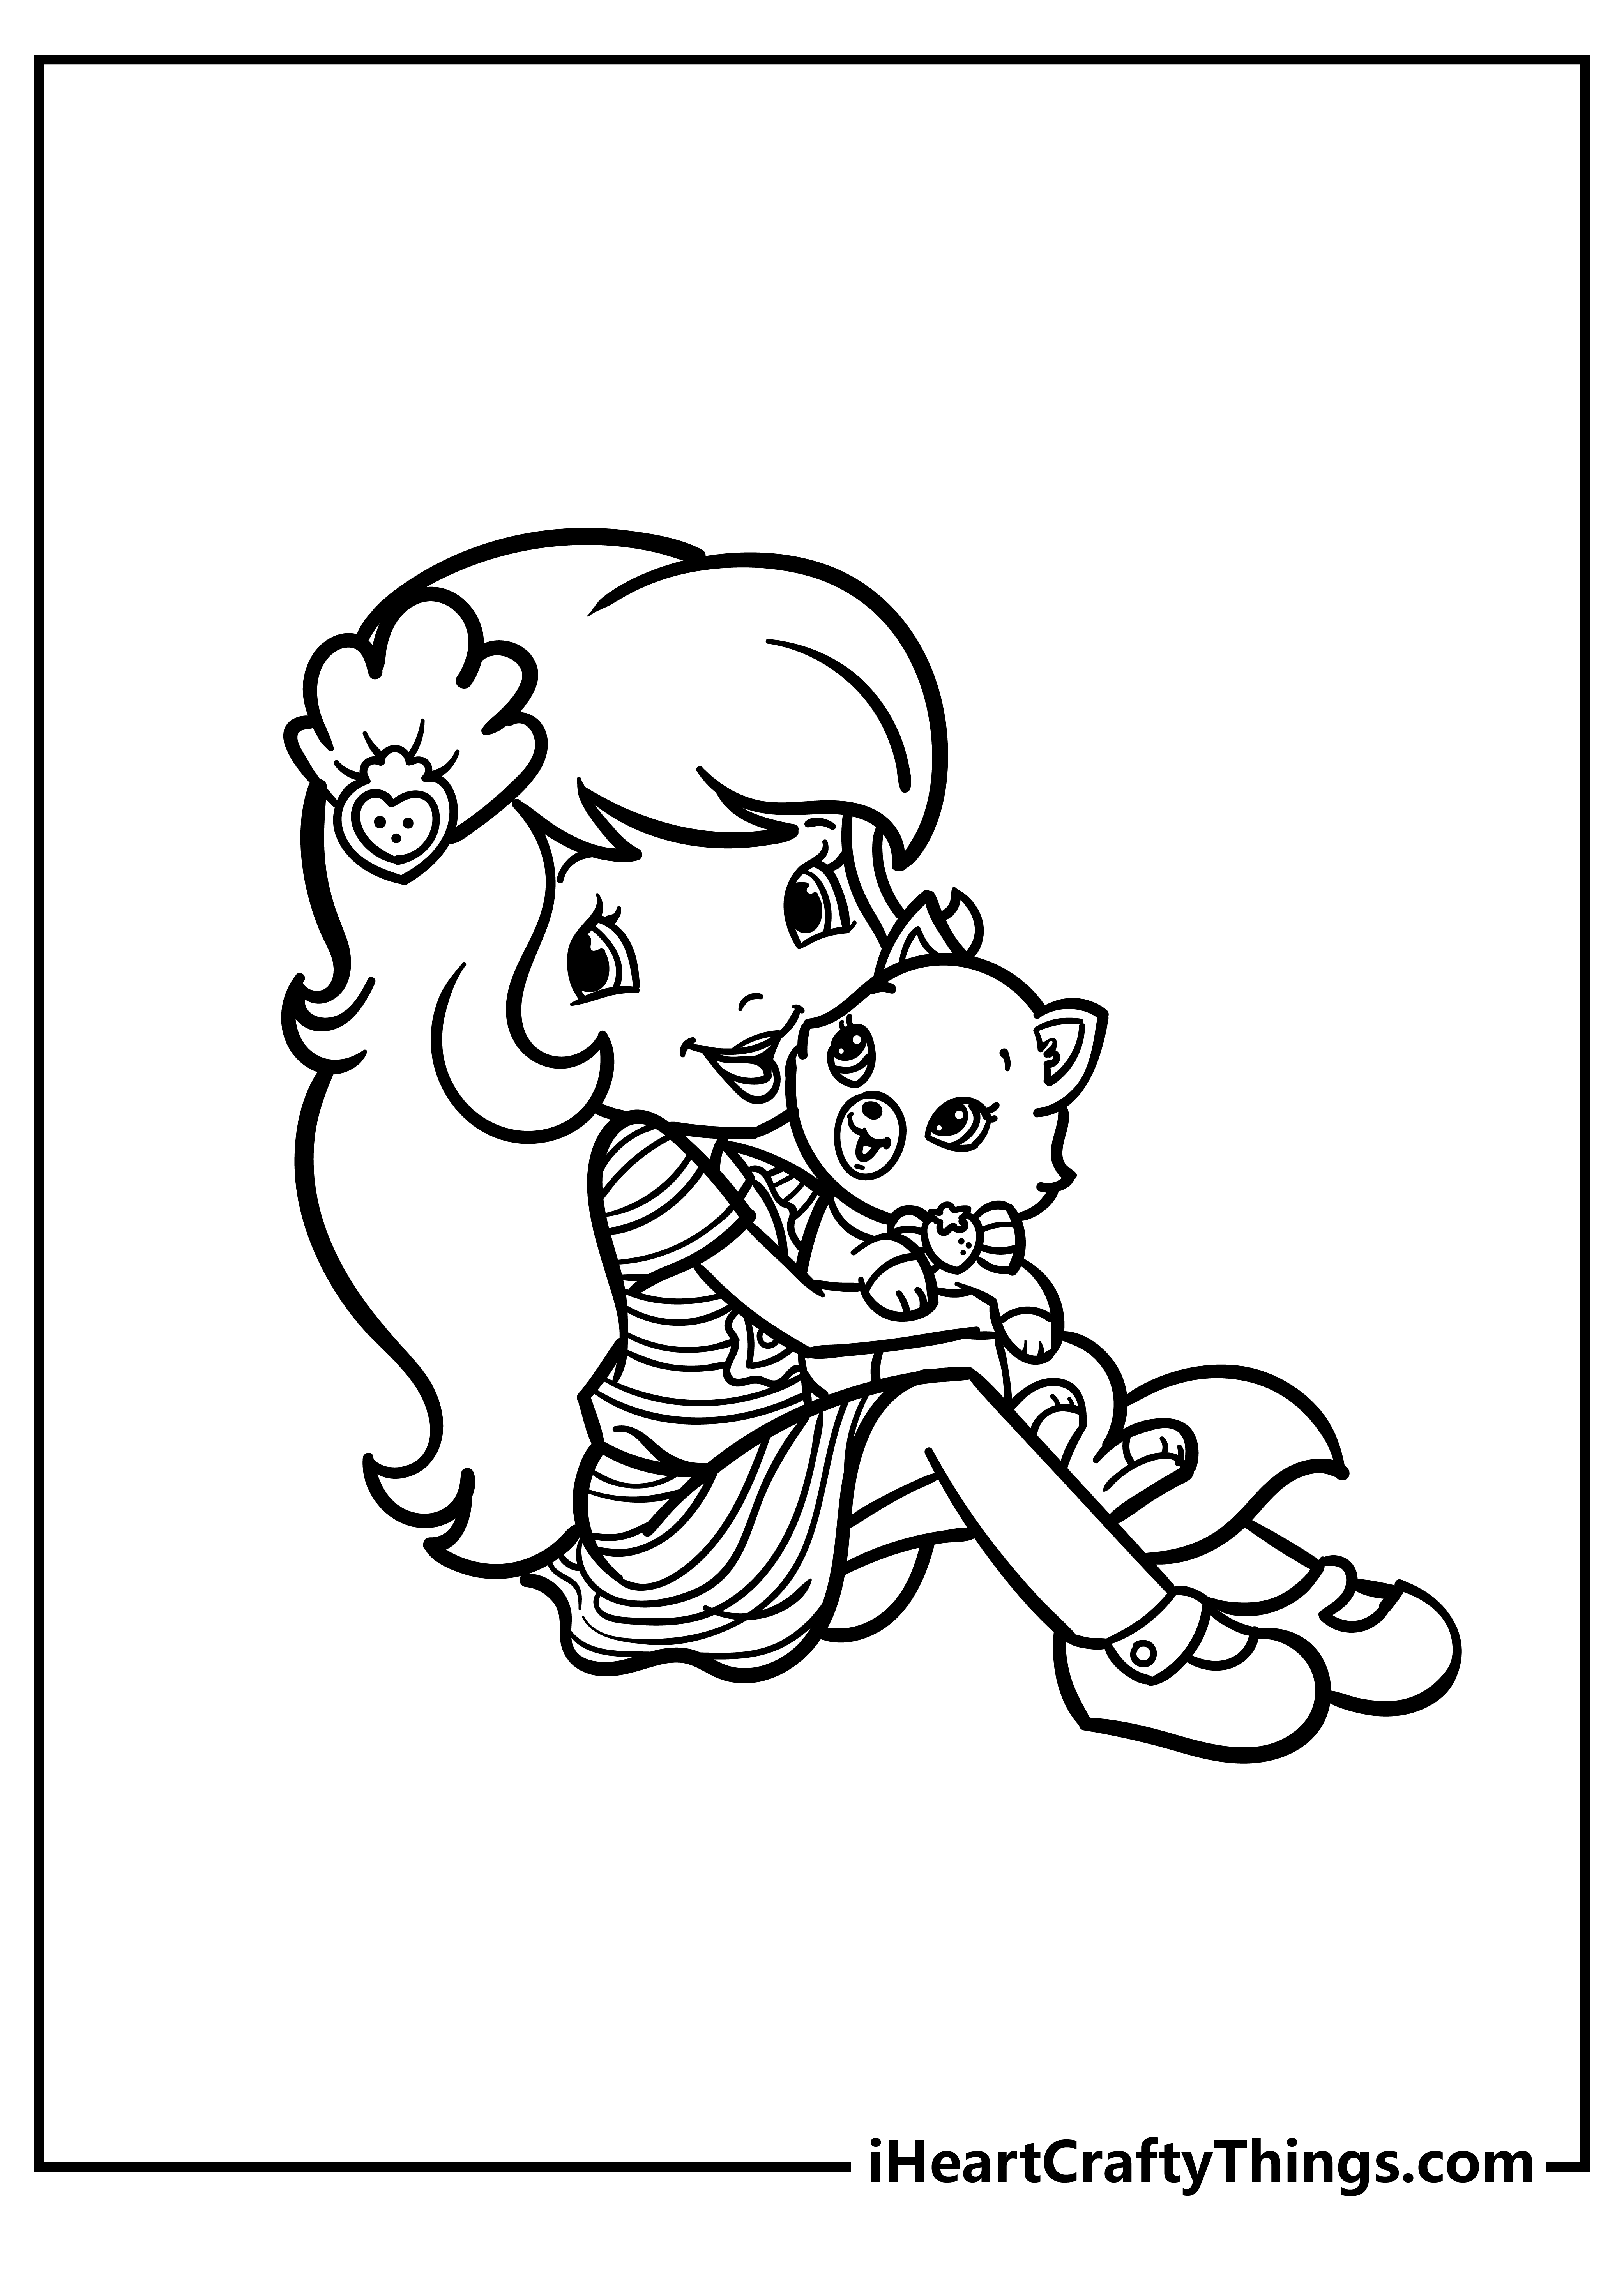 Strawberry Shortcake Coloring Pages for preschoolers free printable